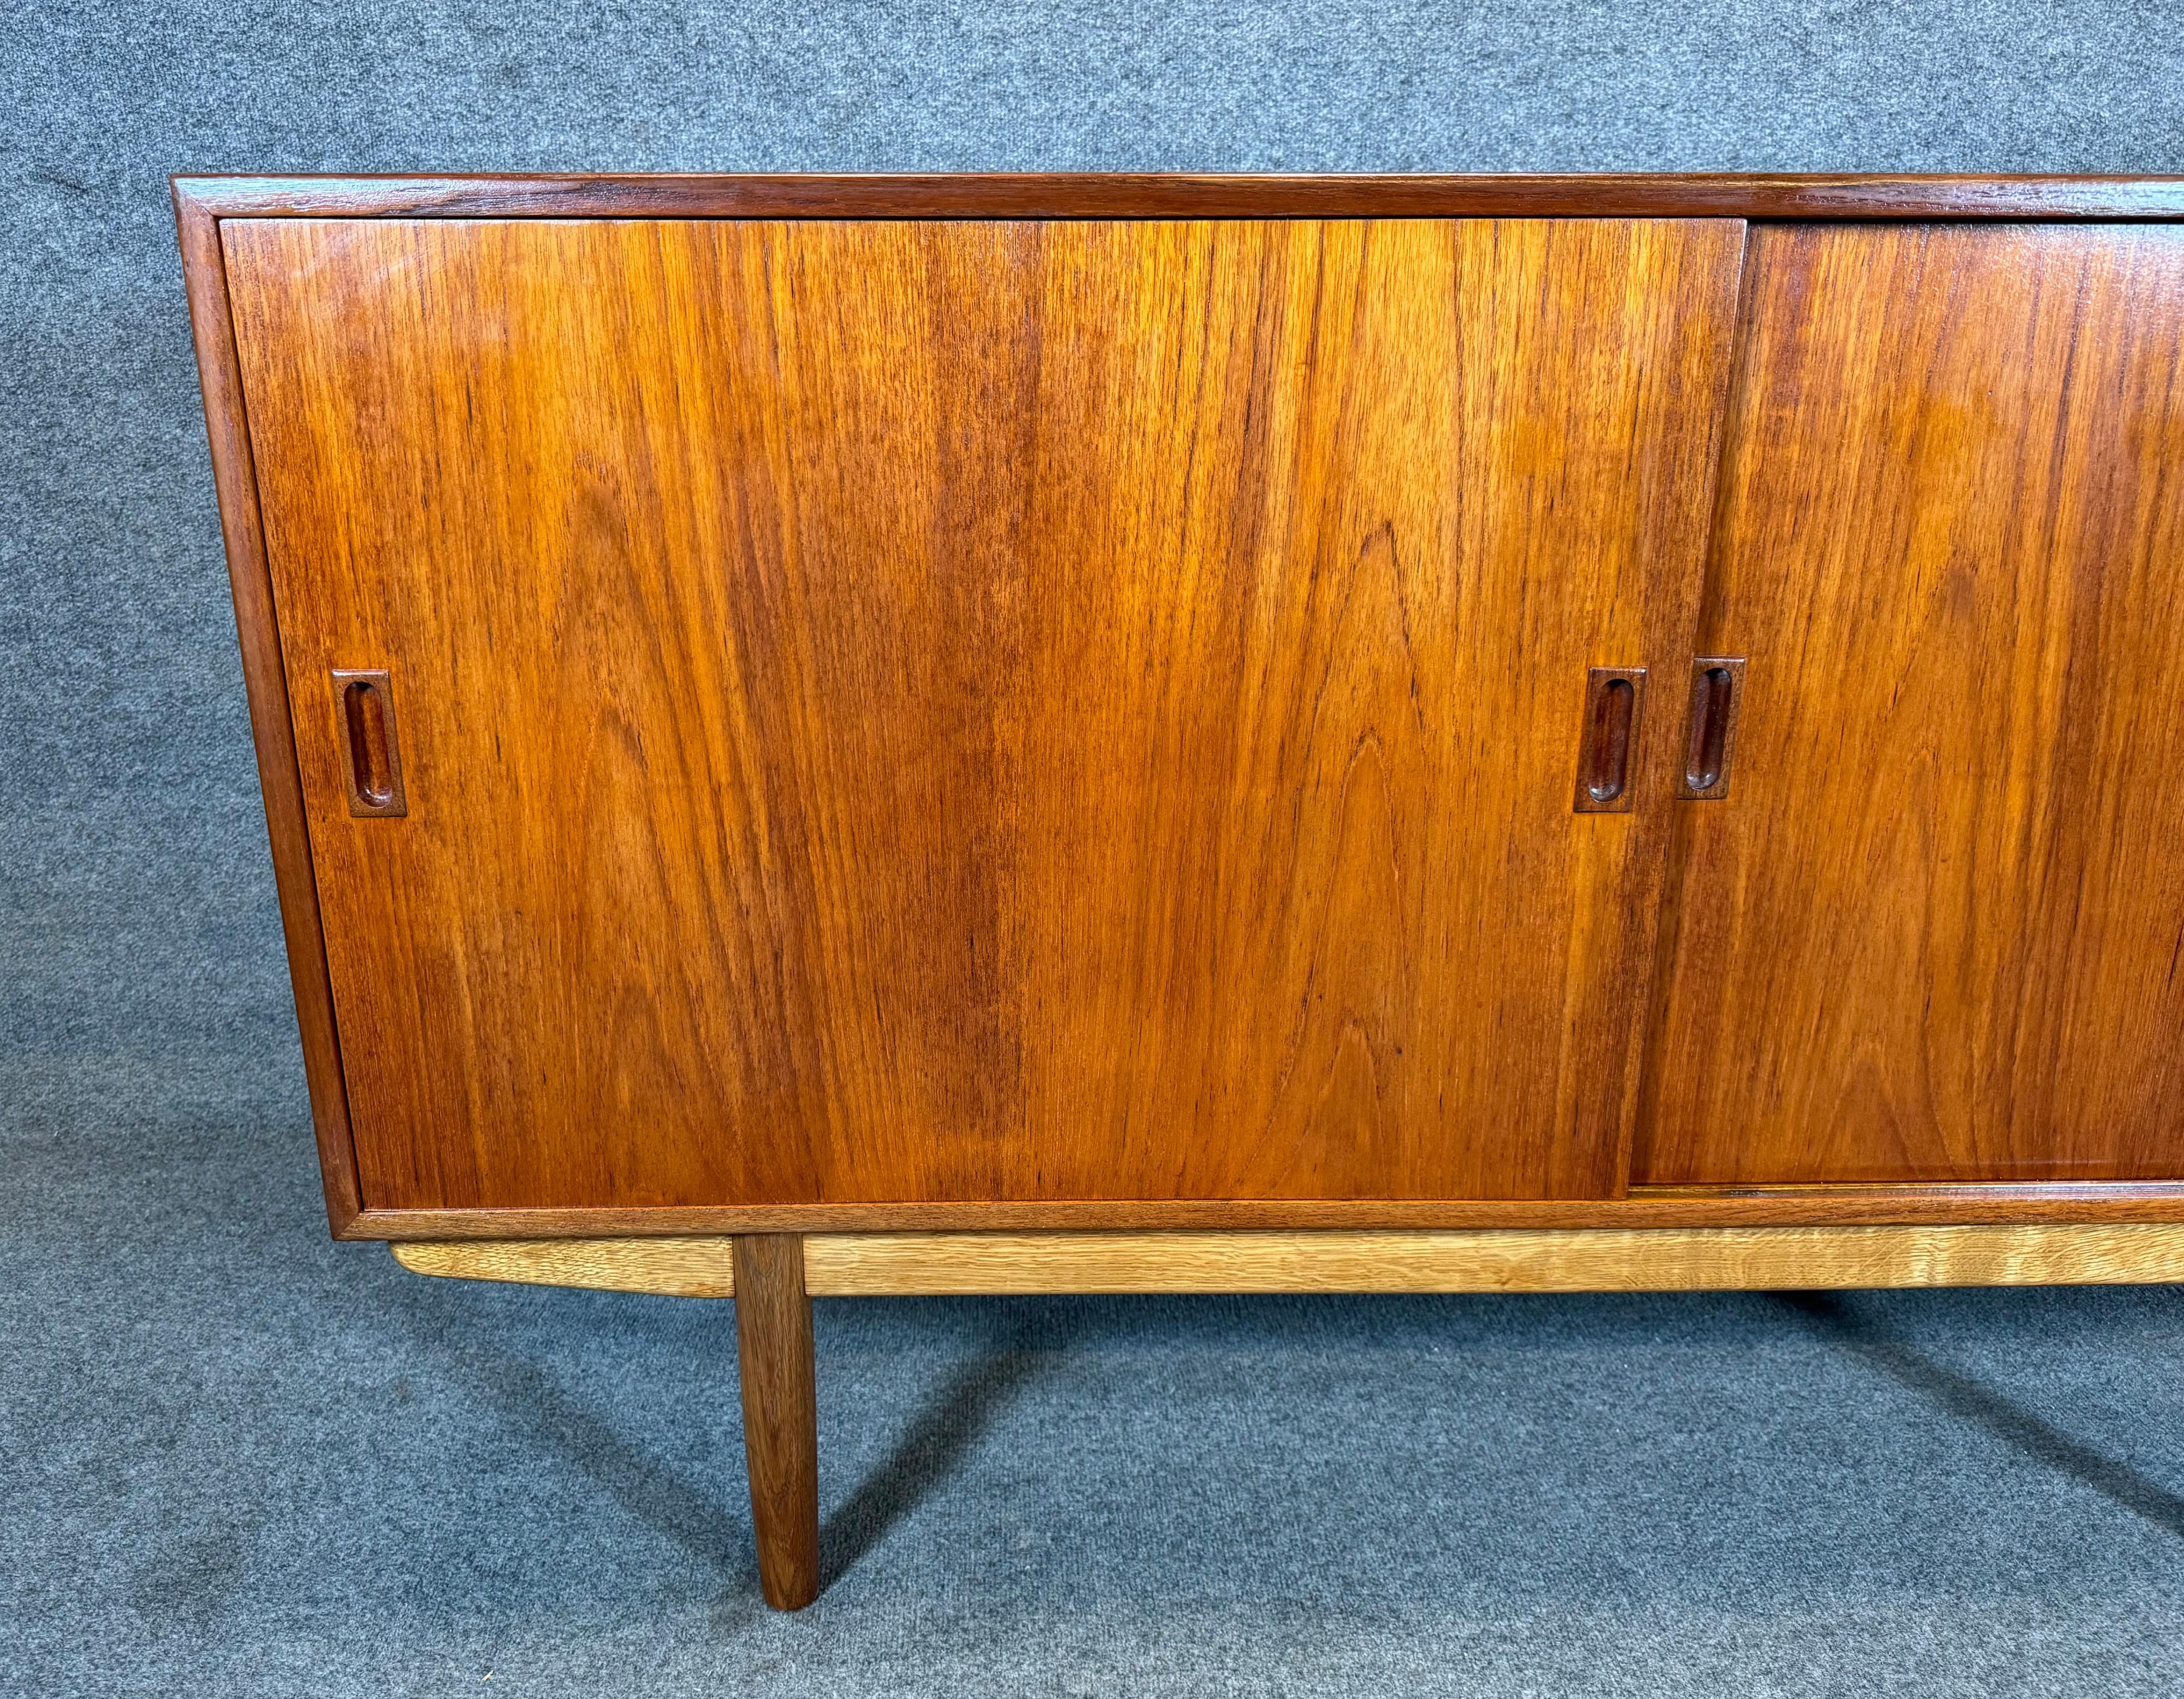 Here ia a beautiful scandinavian modern compact sideboard in teak and oak designed by Borge Mogensen and manufactured by Soborg Mobelfabrik in Sweden in the 1960's.
This exquisite case piece, recently imported from Europe to California before its